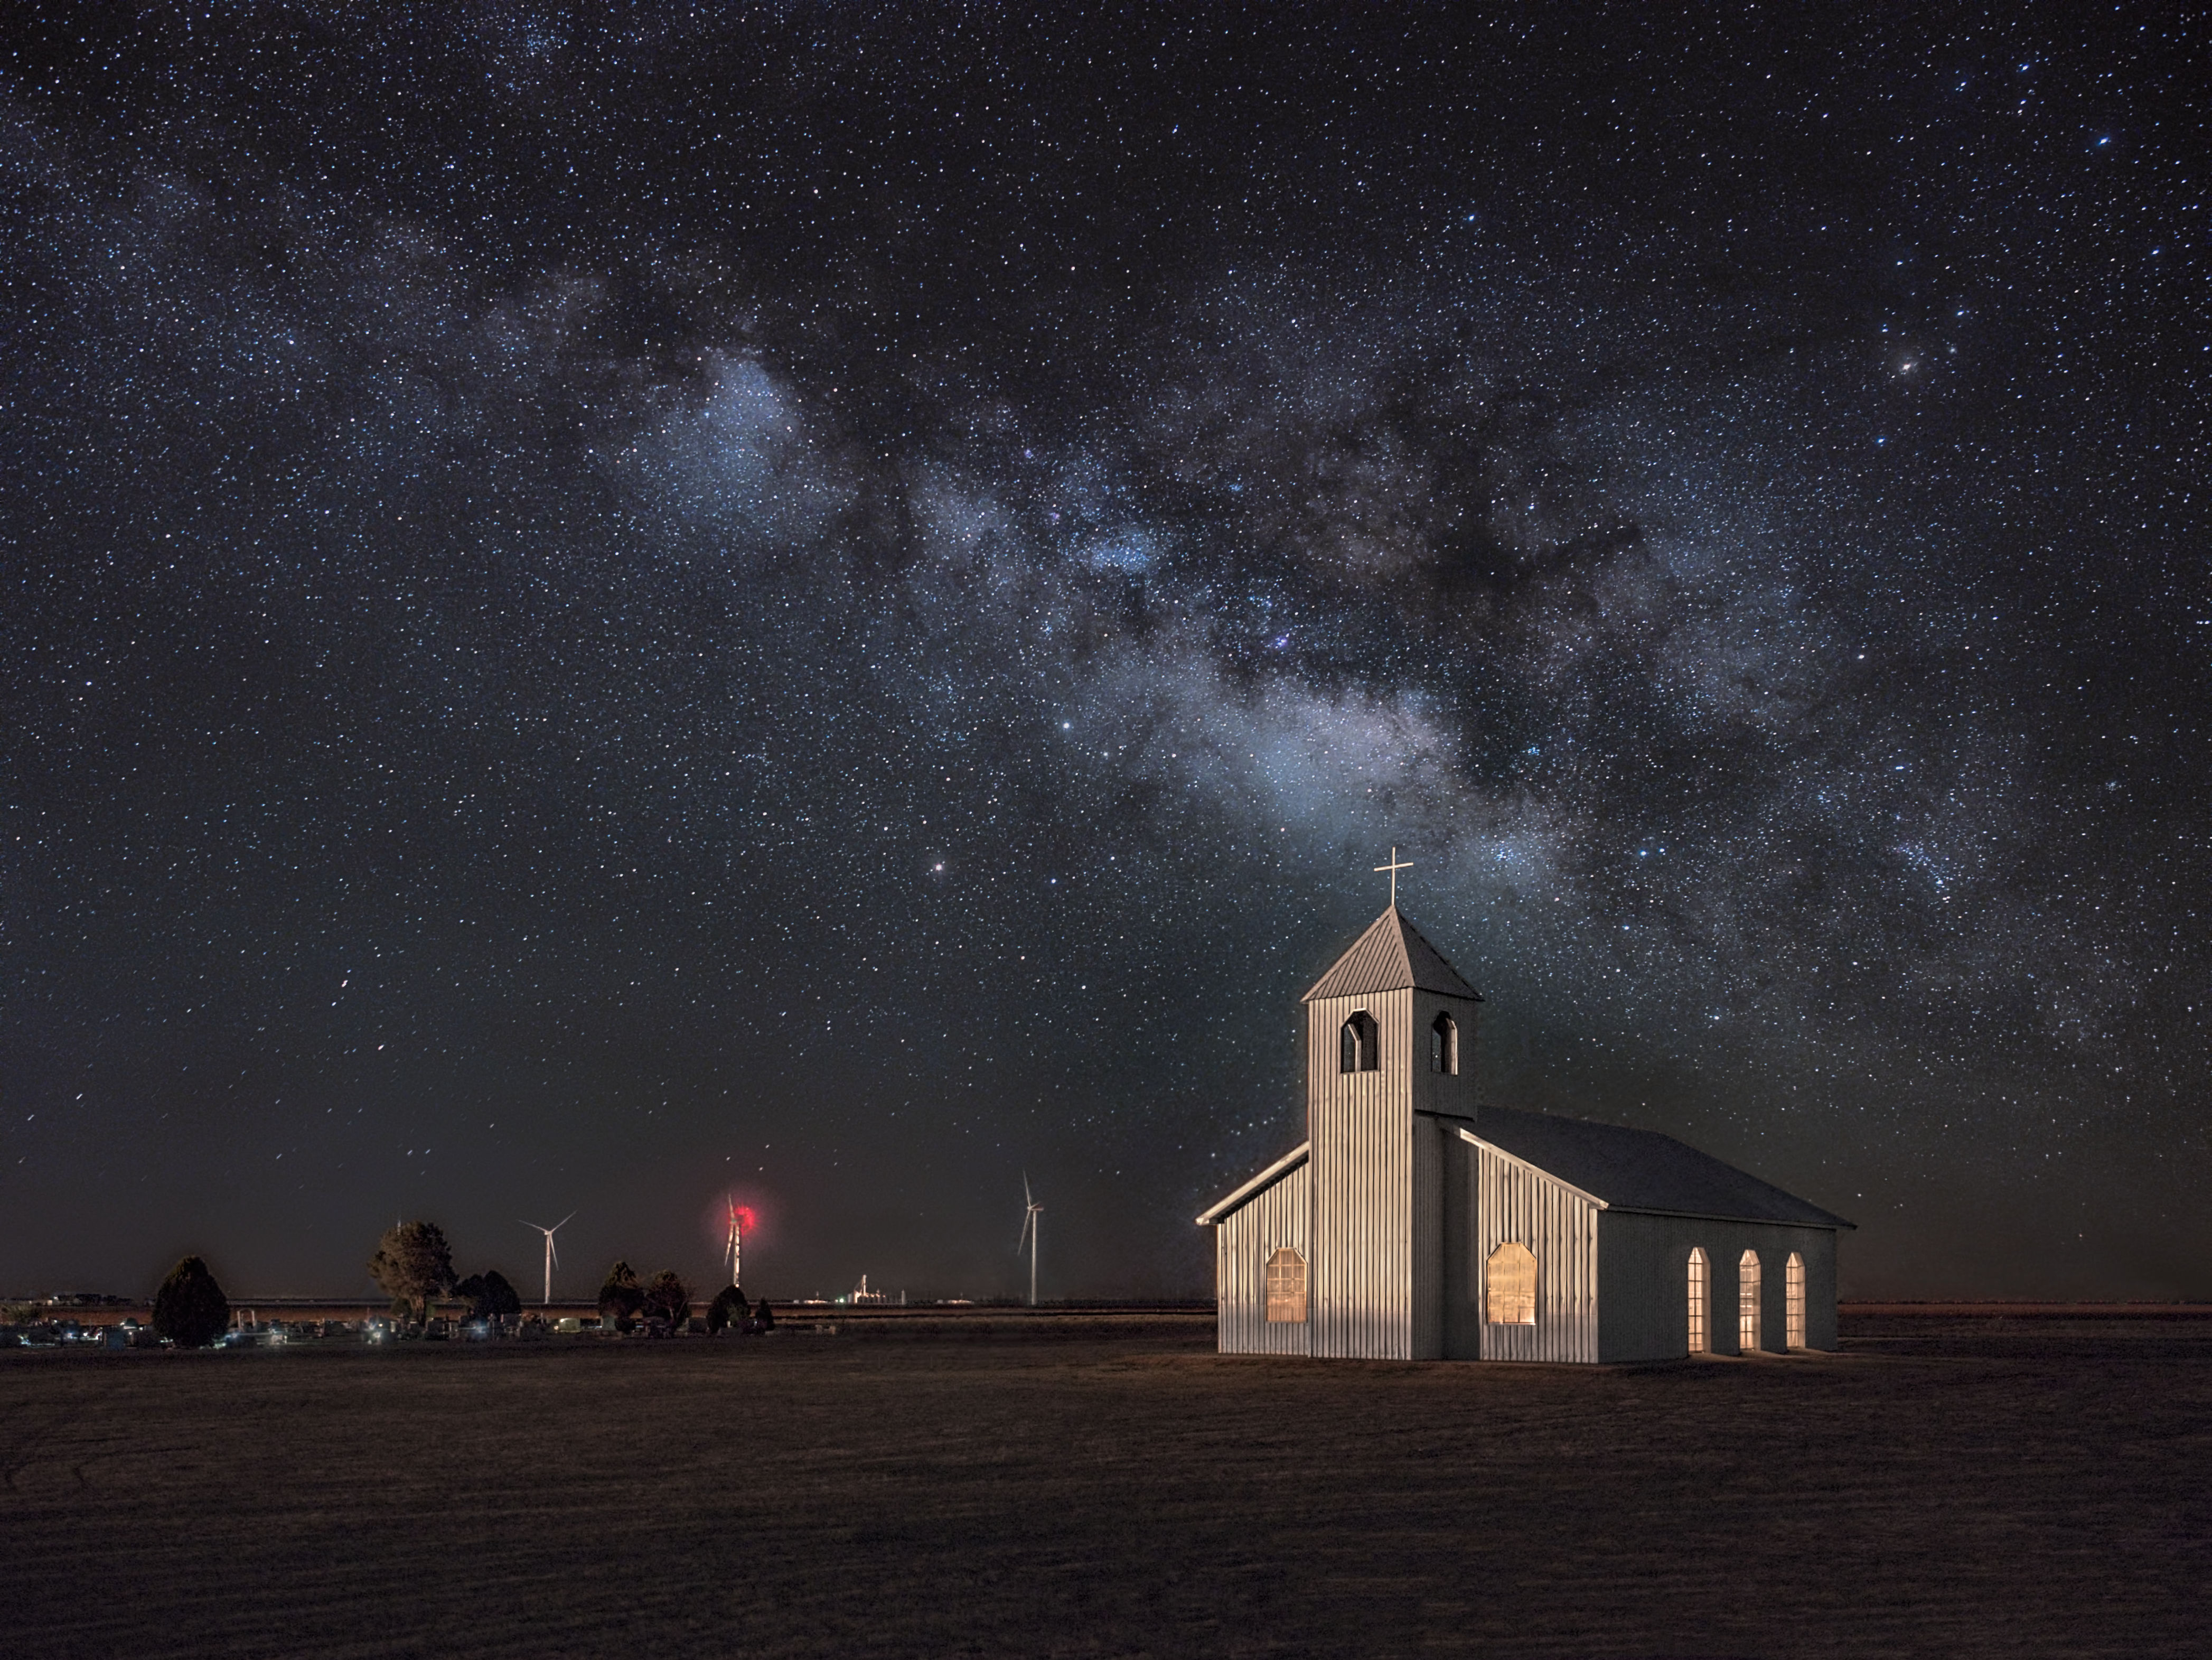 Nighttime At The Chapel - Ralls, Texas - James Clinich